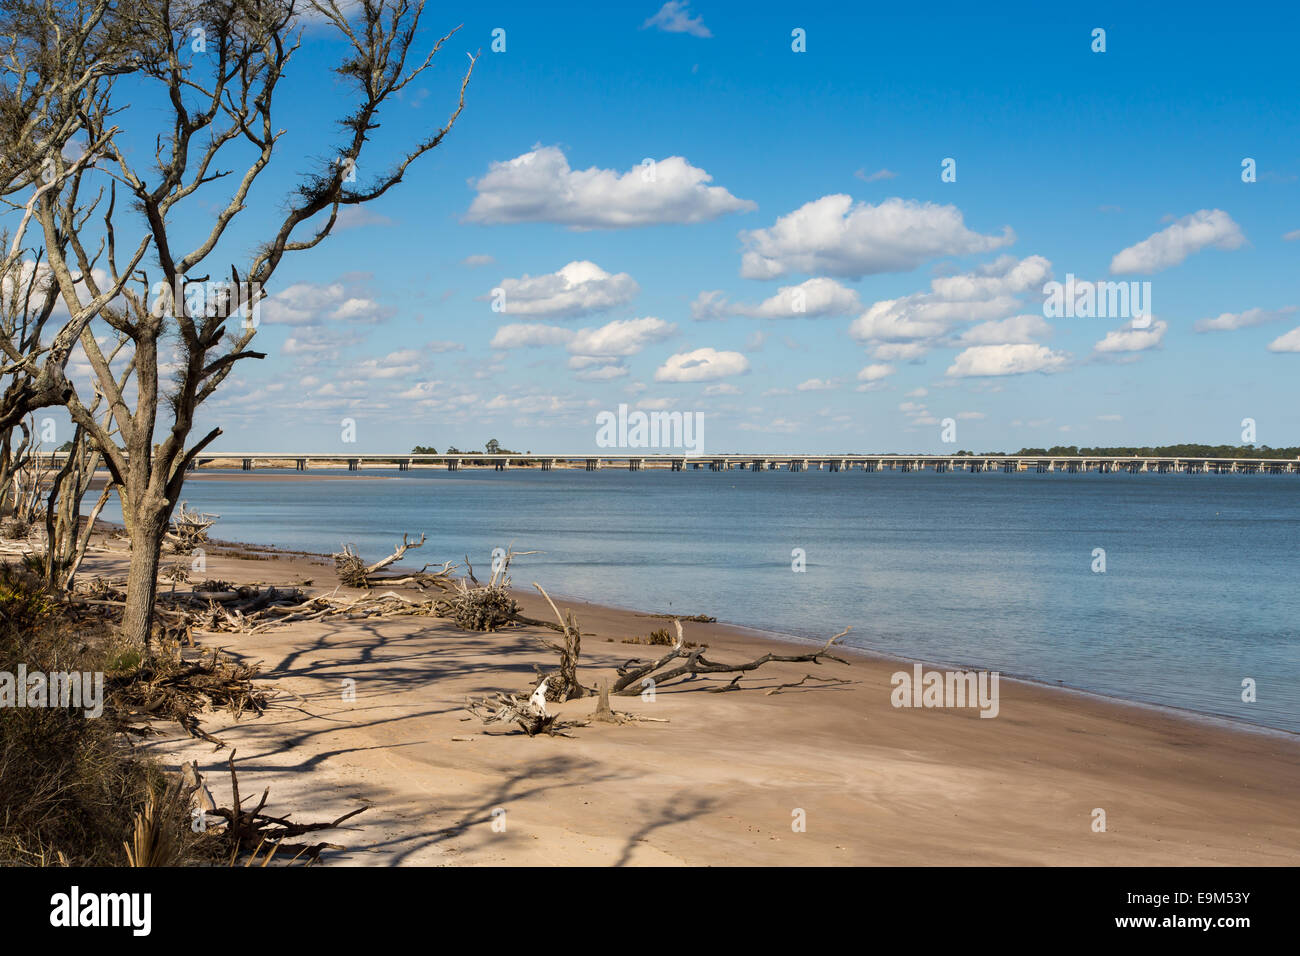 This is the view from the beach at Big Talbot Island, Florida. The bridge leads to Amelia Island. Stock Photo